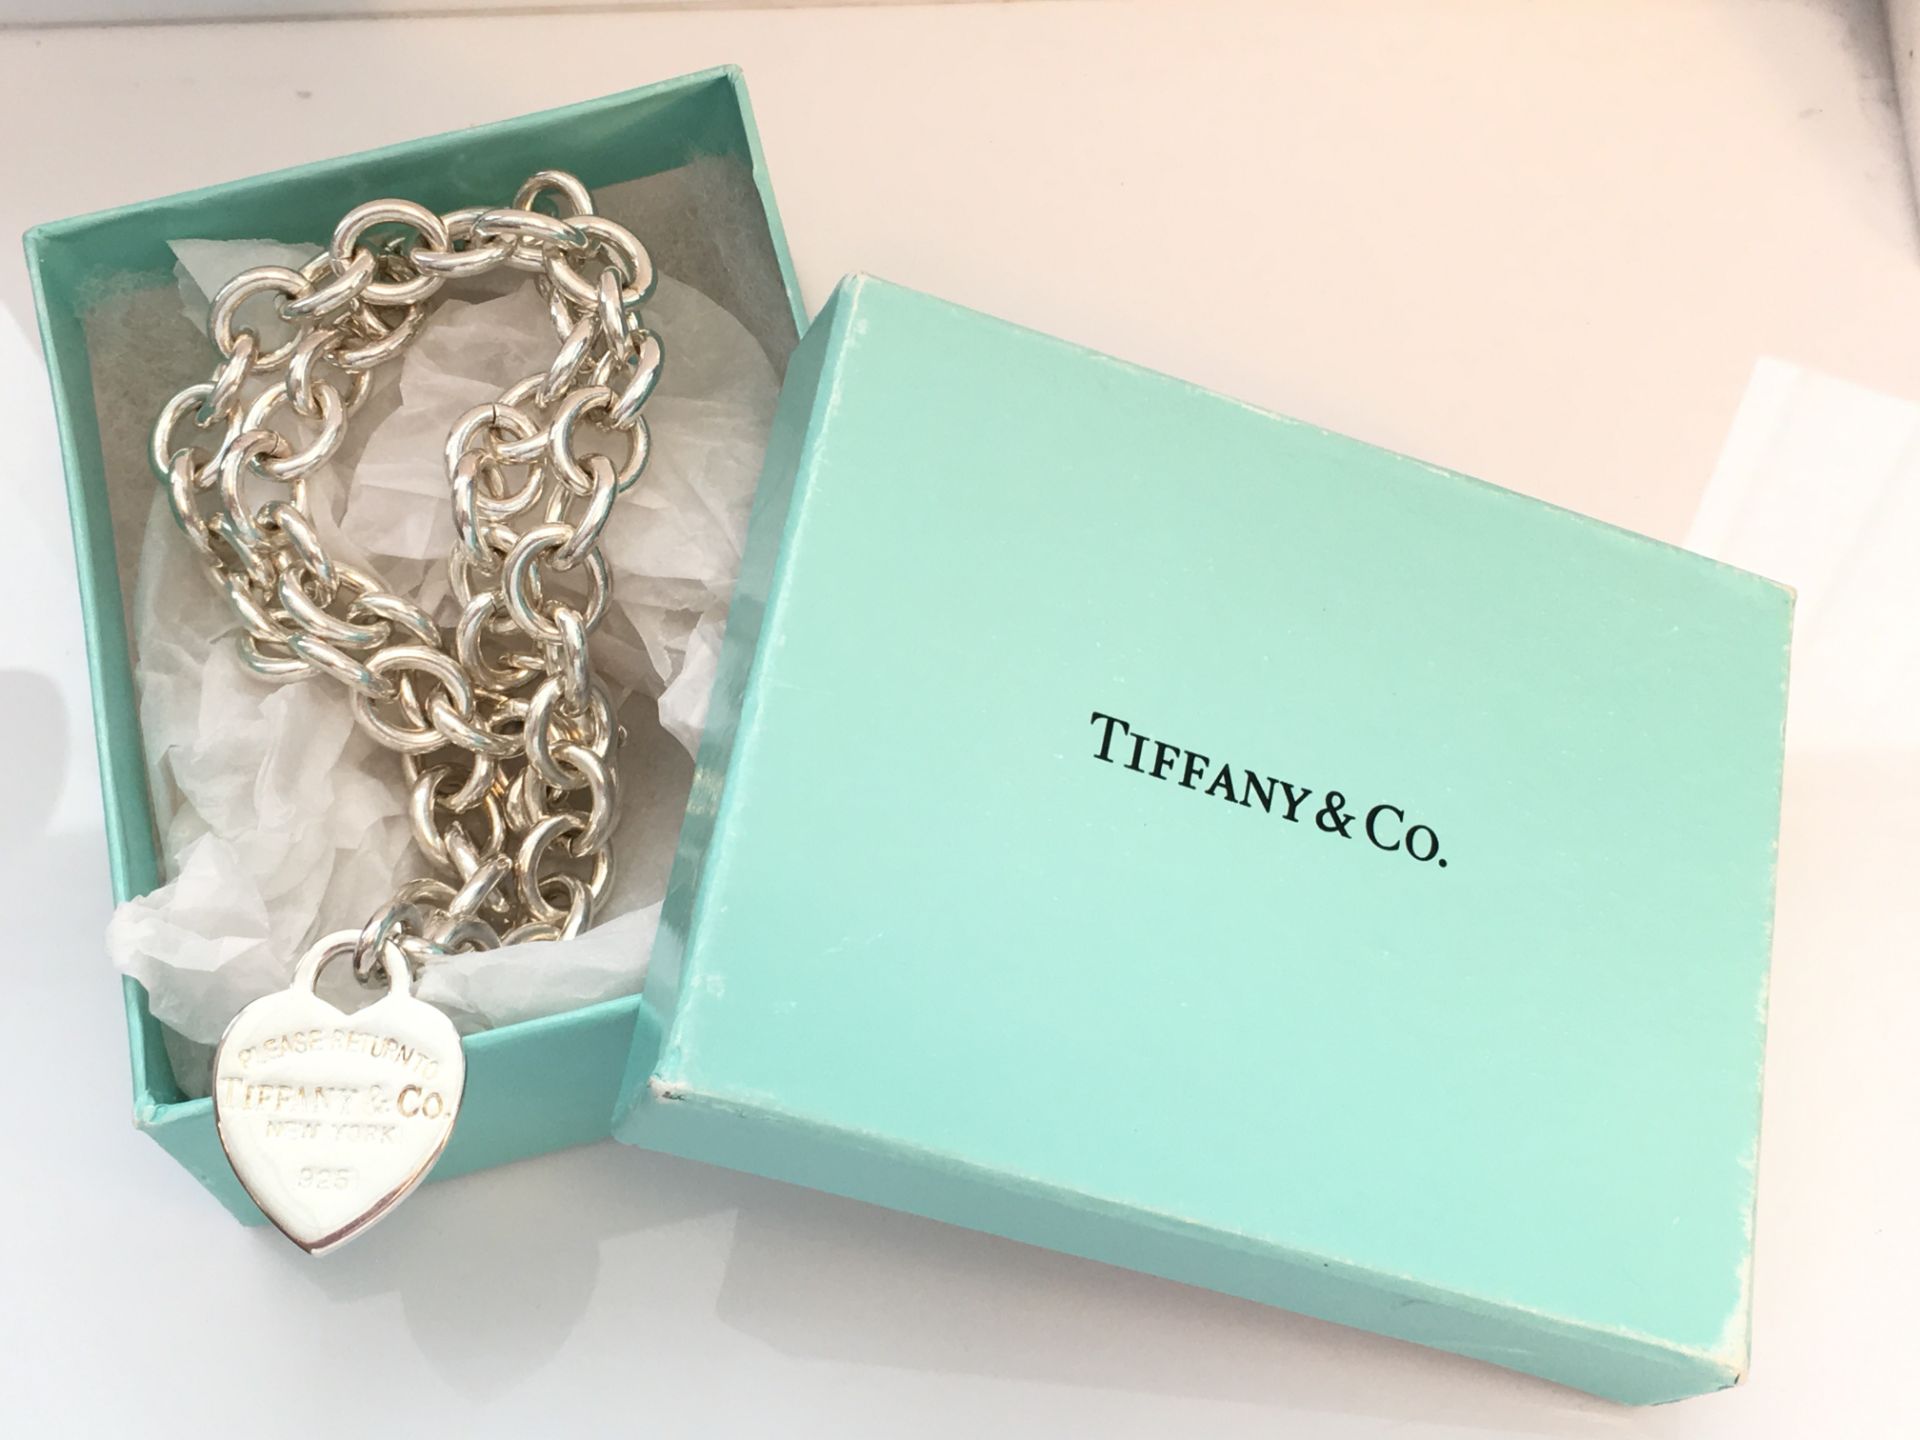 Tiffany Necklace with box - Image 3 of 3